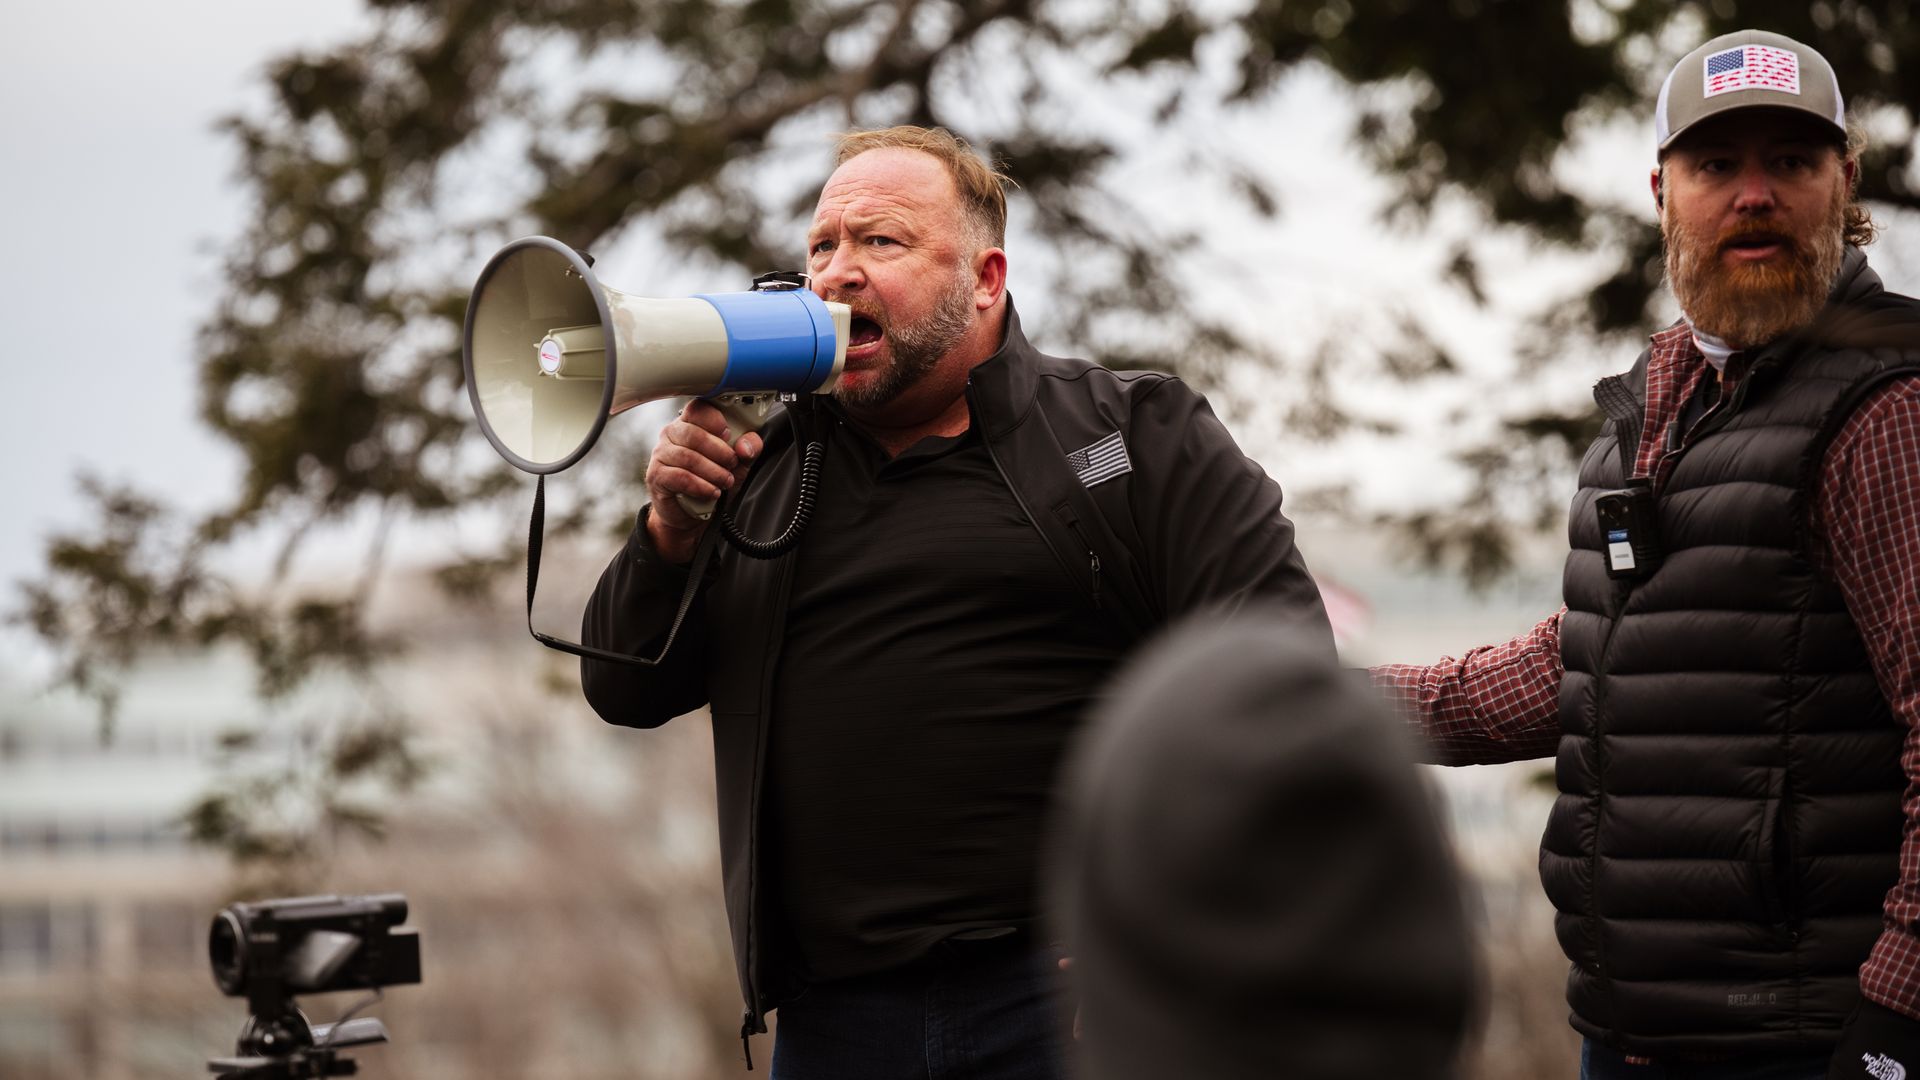 Conspiracy theorist Alex Jones speaks on a megaphone to pro-Trump protestors after they stormed the grounds of the Capitol on January 6, 2021.